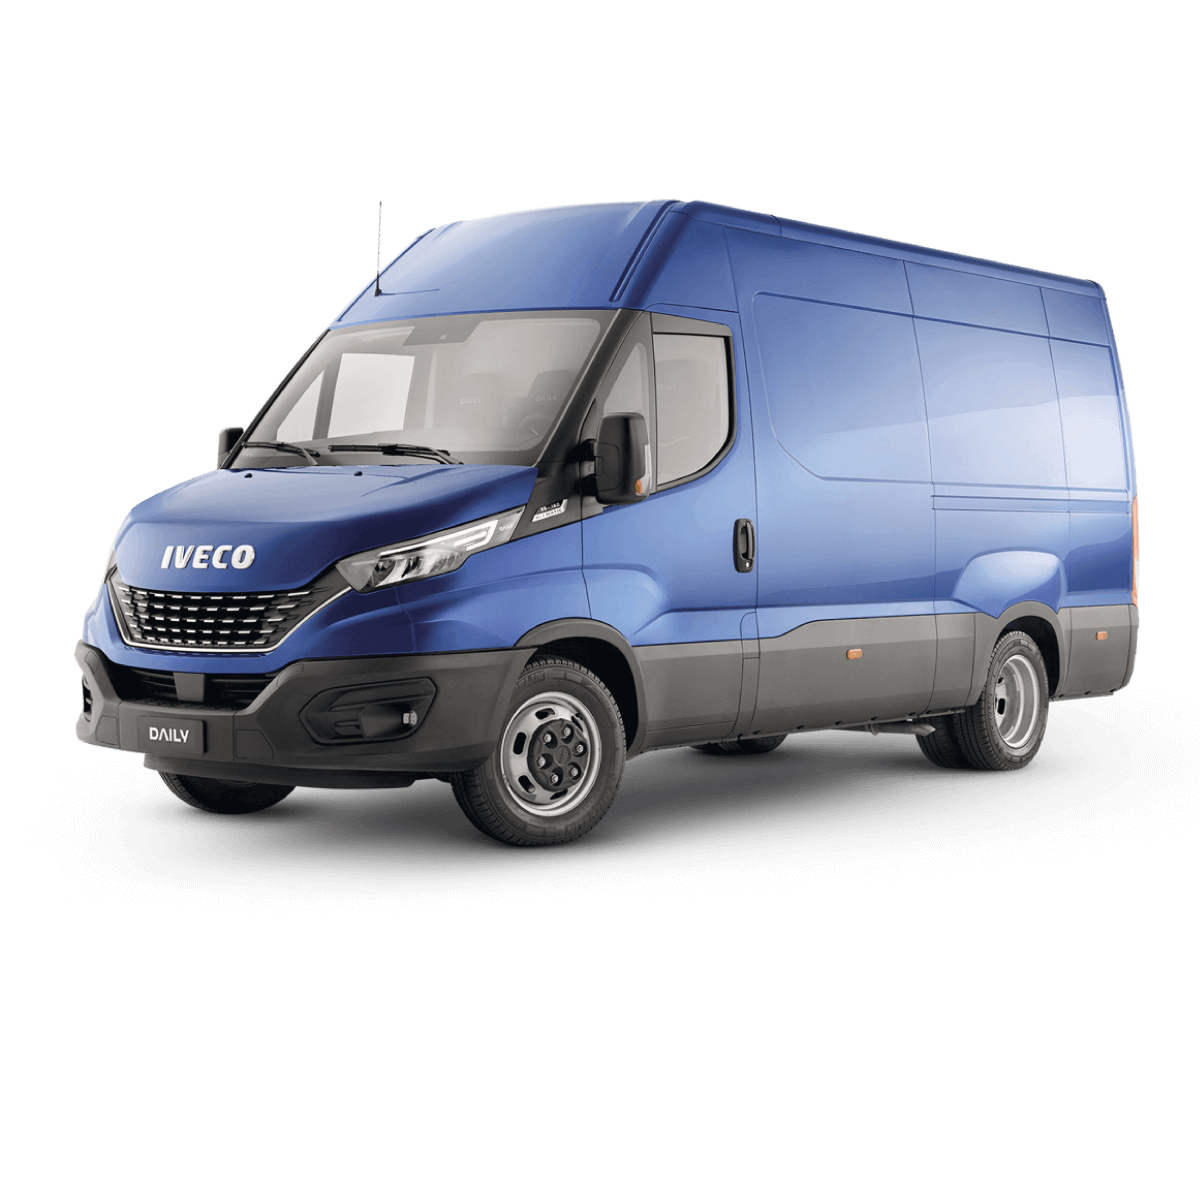 Iveco Daily 2021. Iveco Daily 2022 фургон. Ивеко Дейли 2020. Iveco Daily 2021 фургон. Ивеко дейли 2019